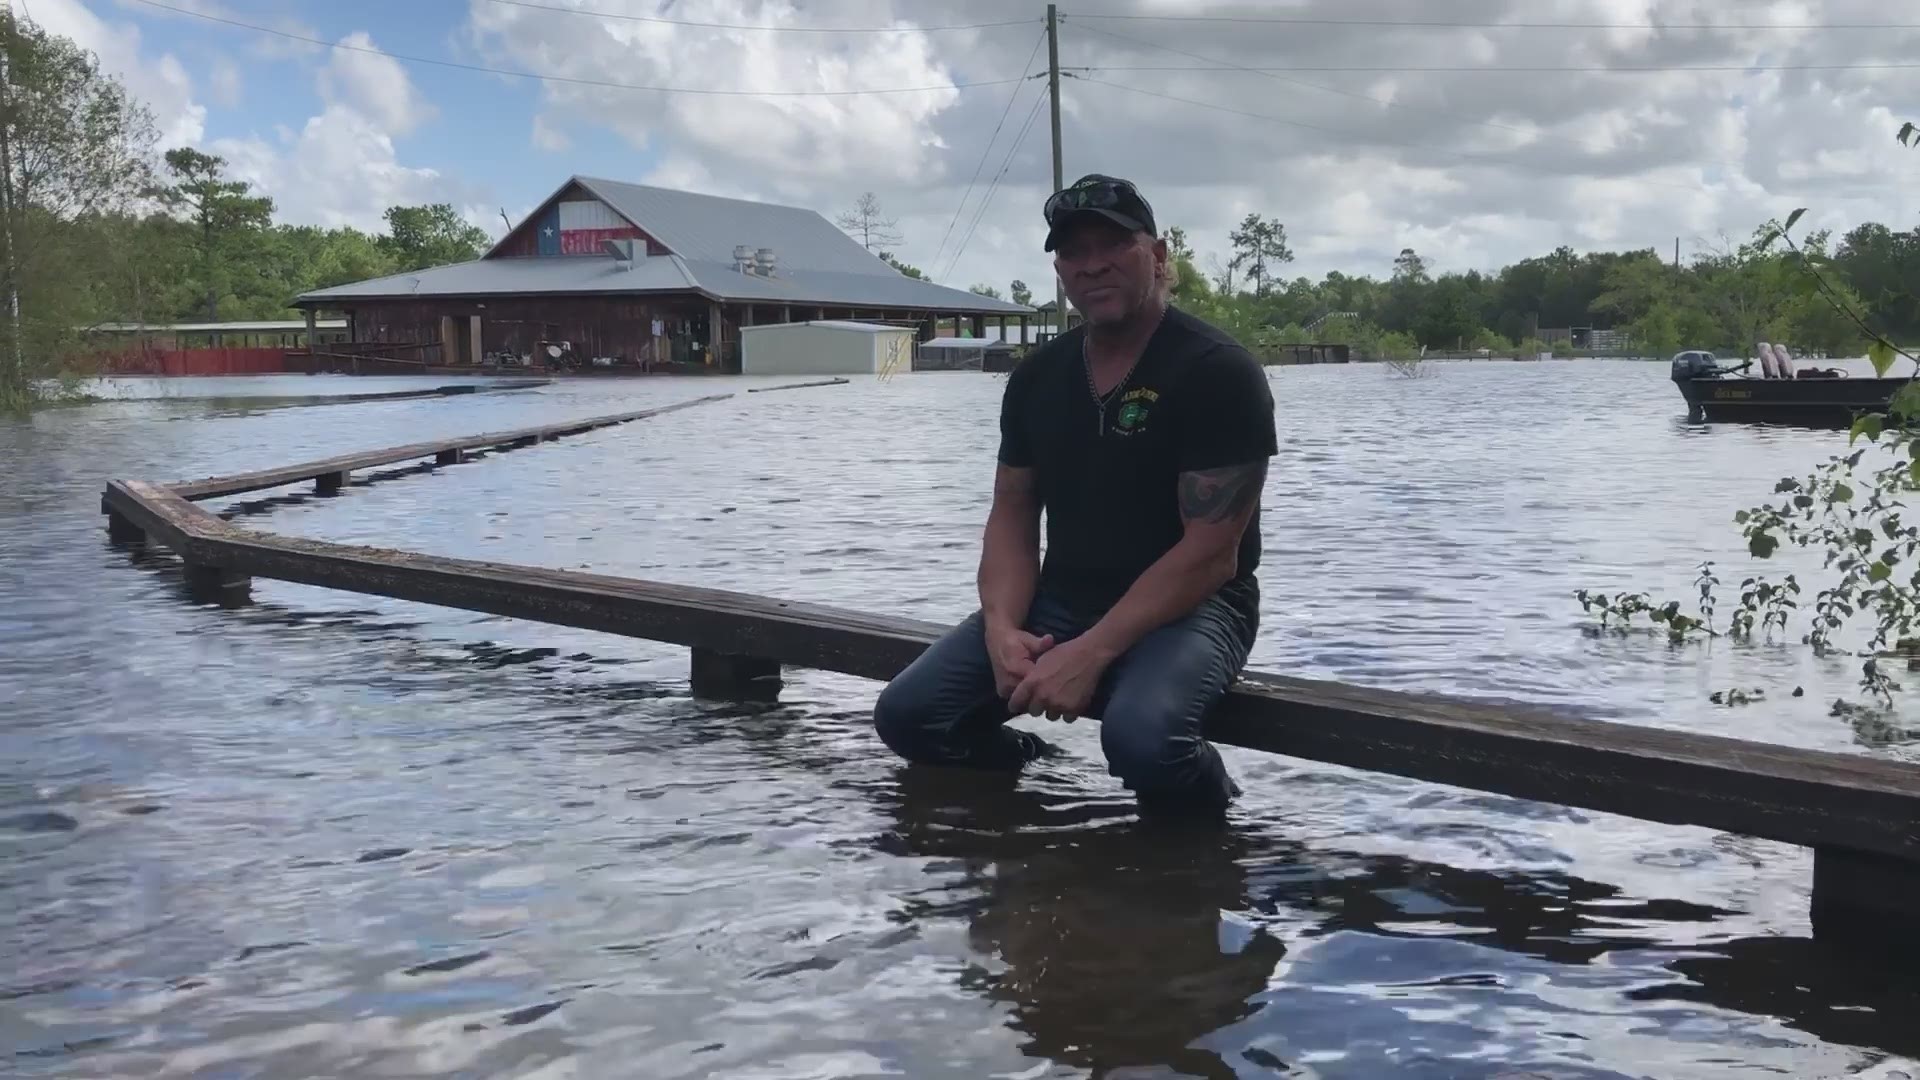 Gary Saurage, the owner, gave an update on Facebook while surrounded by water.